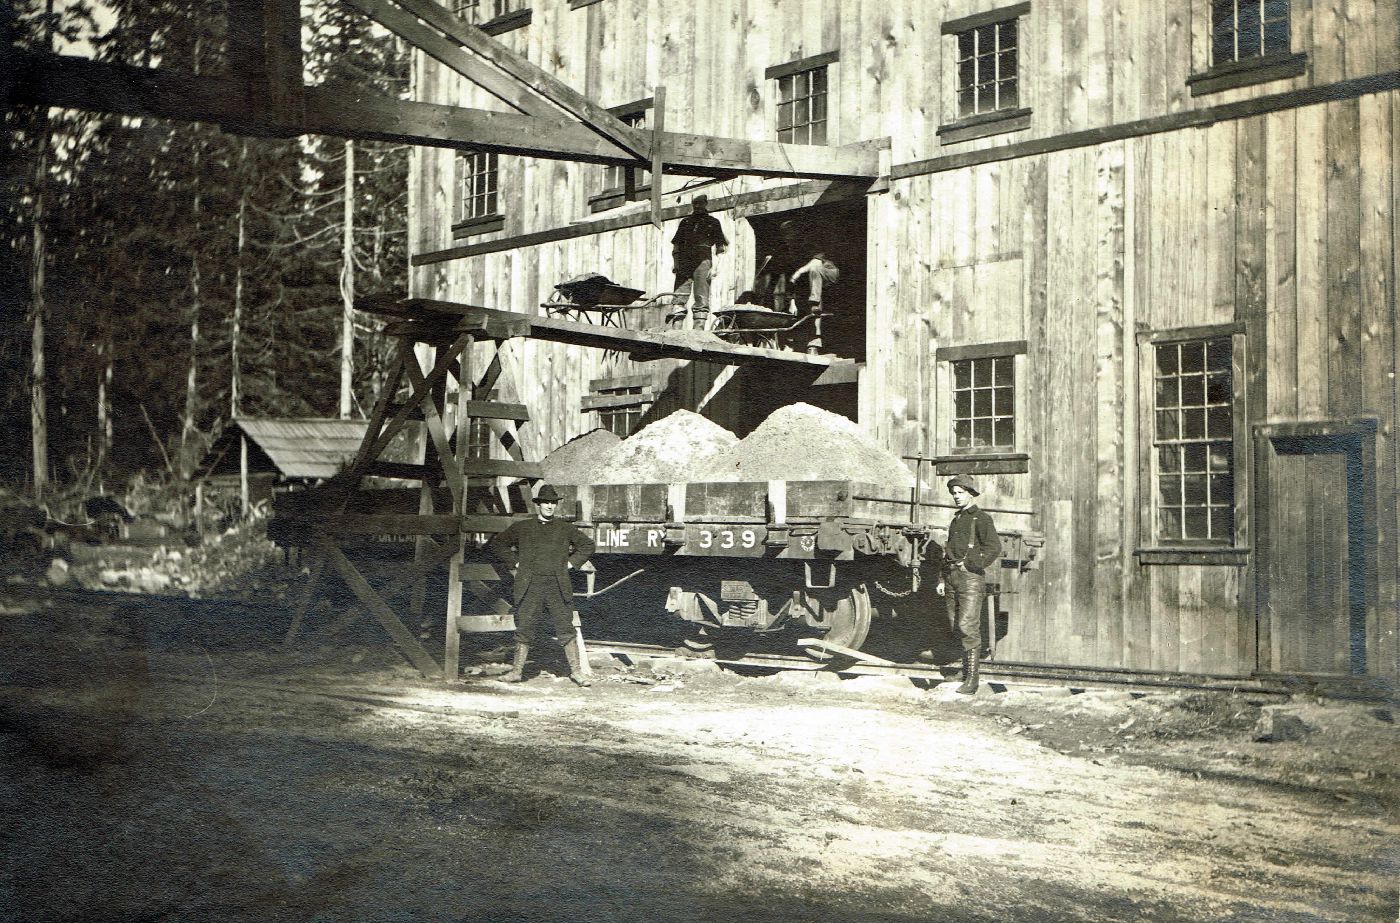 Loading railcar at Dunwell Mines